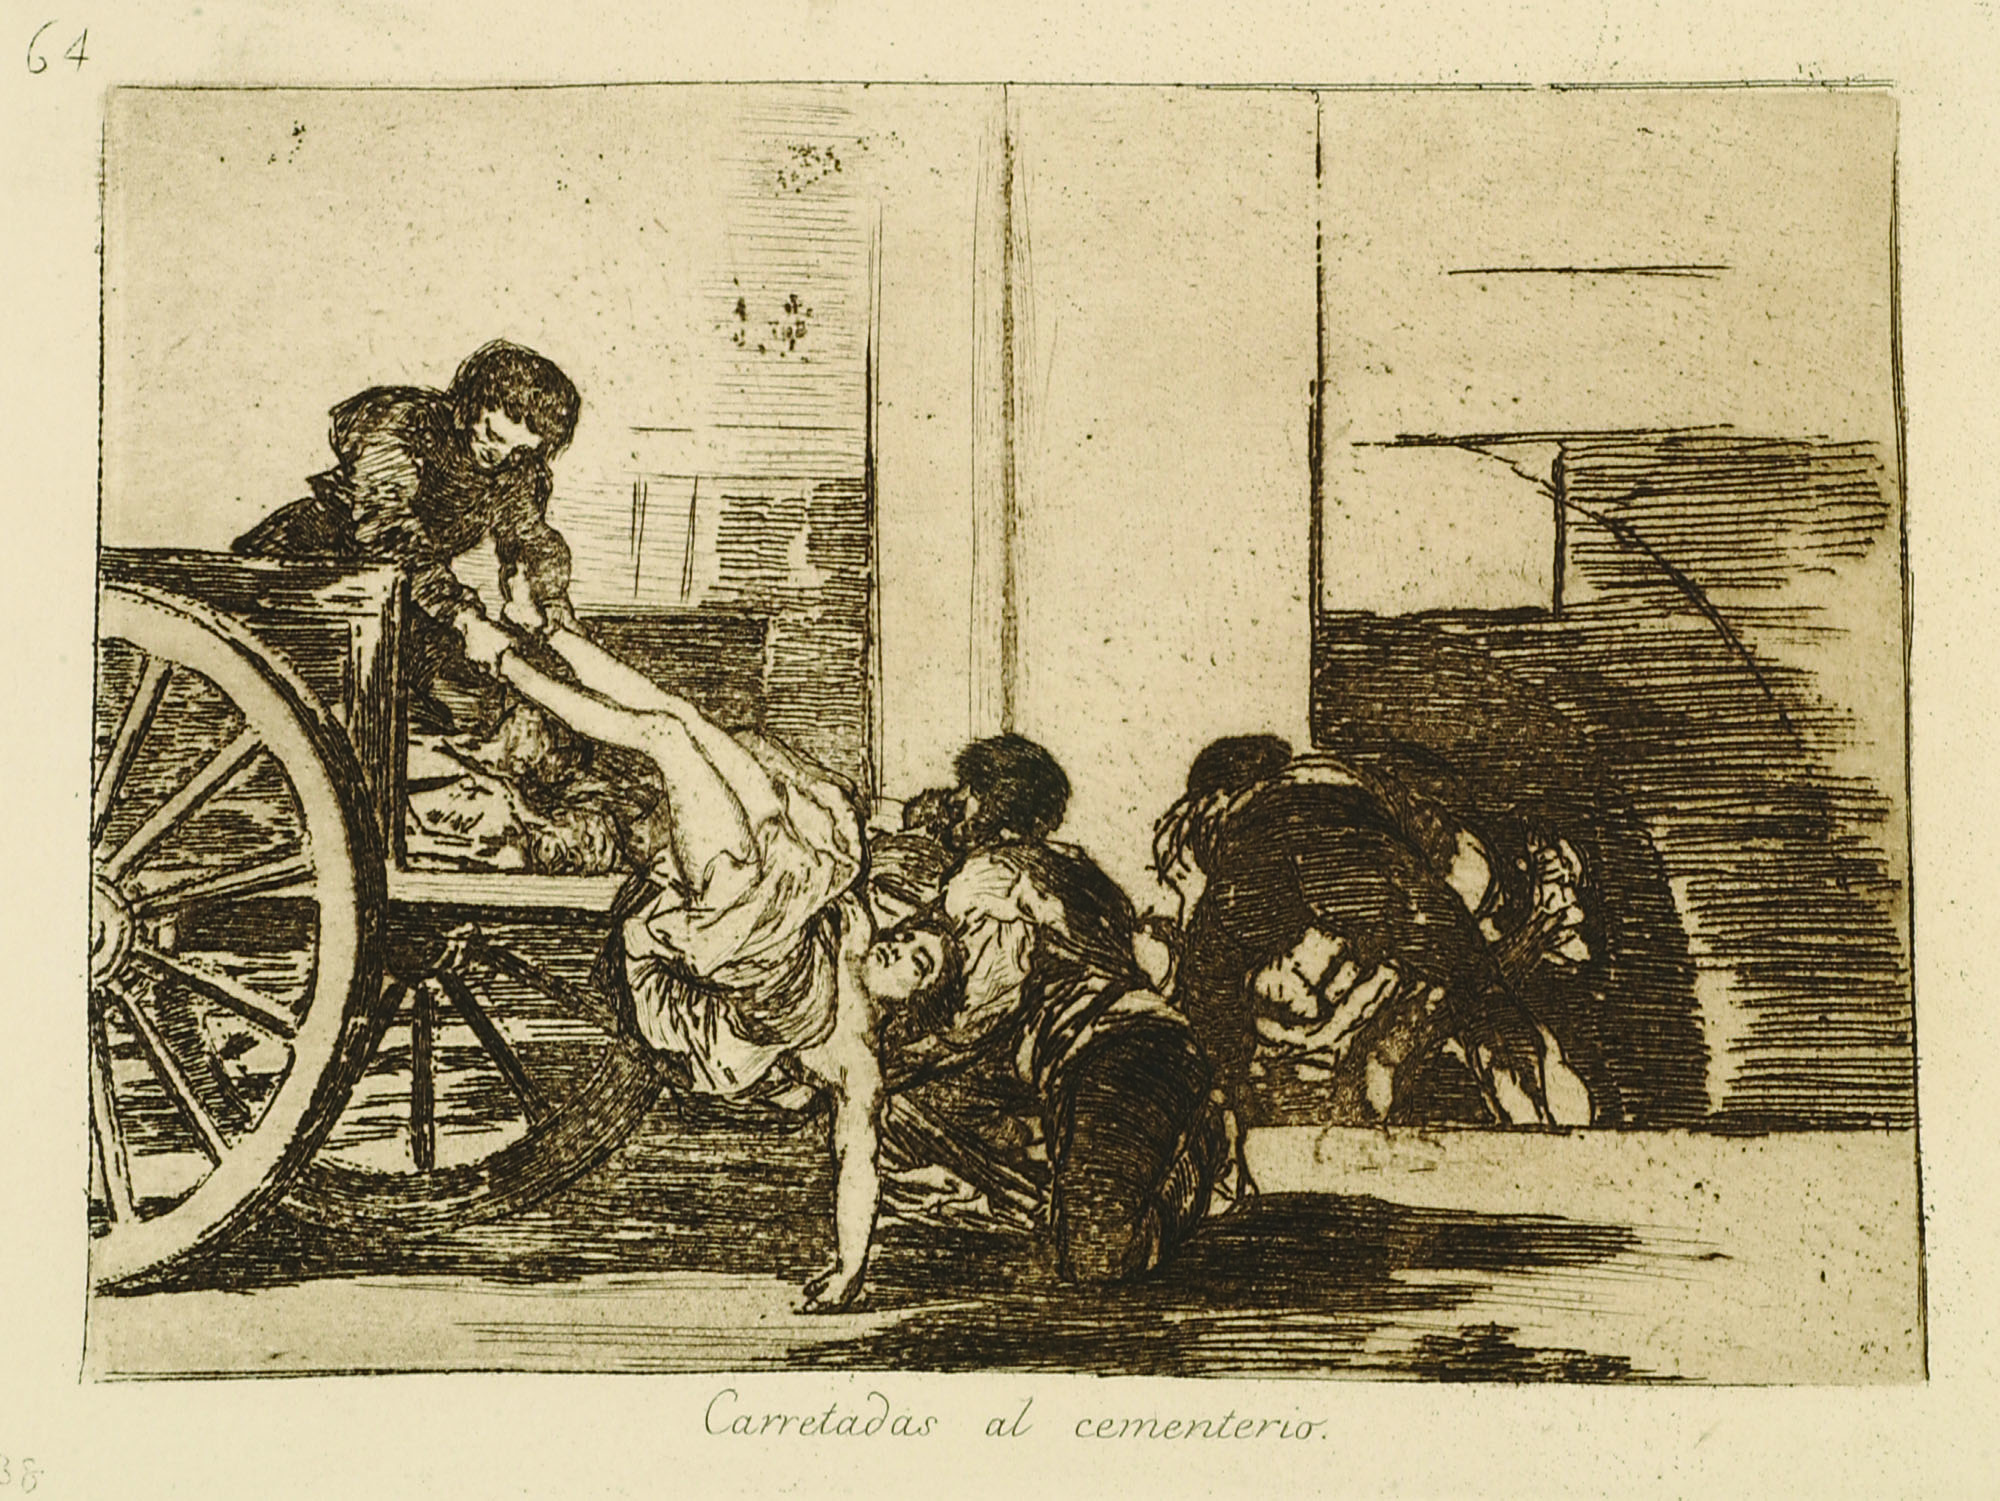 Francisco de Goya y Lucientes, Carretadas al cementerio (Cartloads to the cemetery), from the series “The Disasters of War,”  ca. 1820 (1863 1st ed.). Sixth edition printed in the Calcografía nacional for the Royal Academy of San Fernando in 1930. Etching, aquatint, and drypoint on laid Arches paper. Courtesy of the Grinnell College Art Collection, Gift of Helena Percas de Ponseti and Ignacio V. Ponseti.